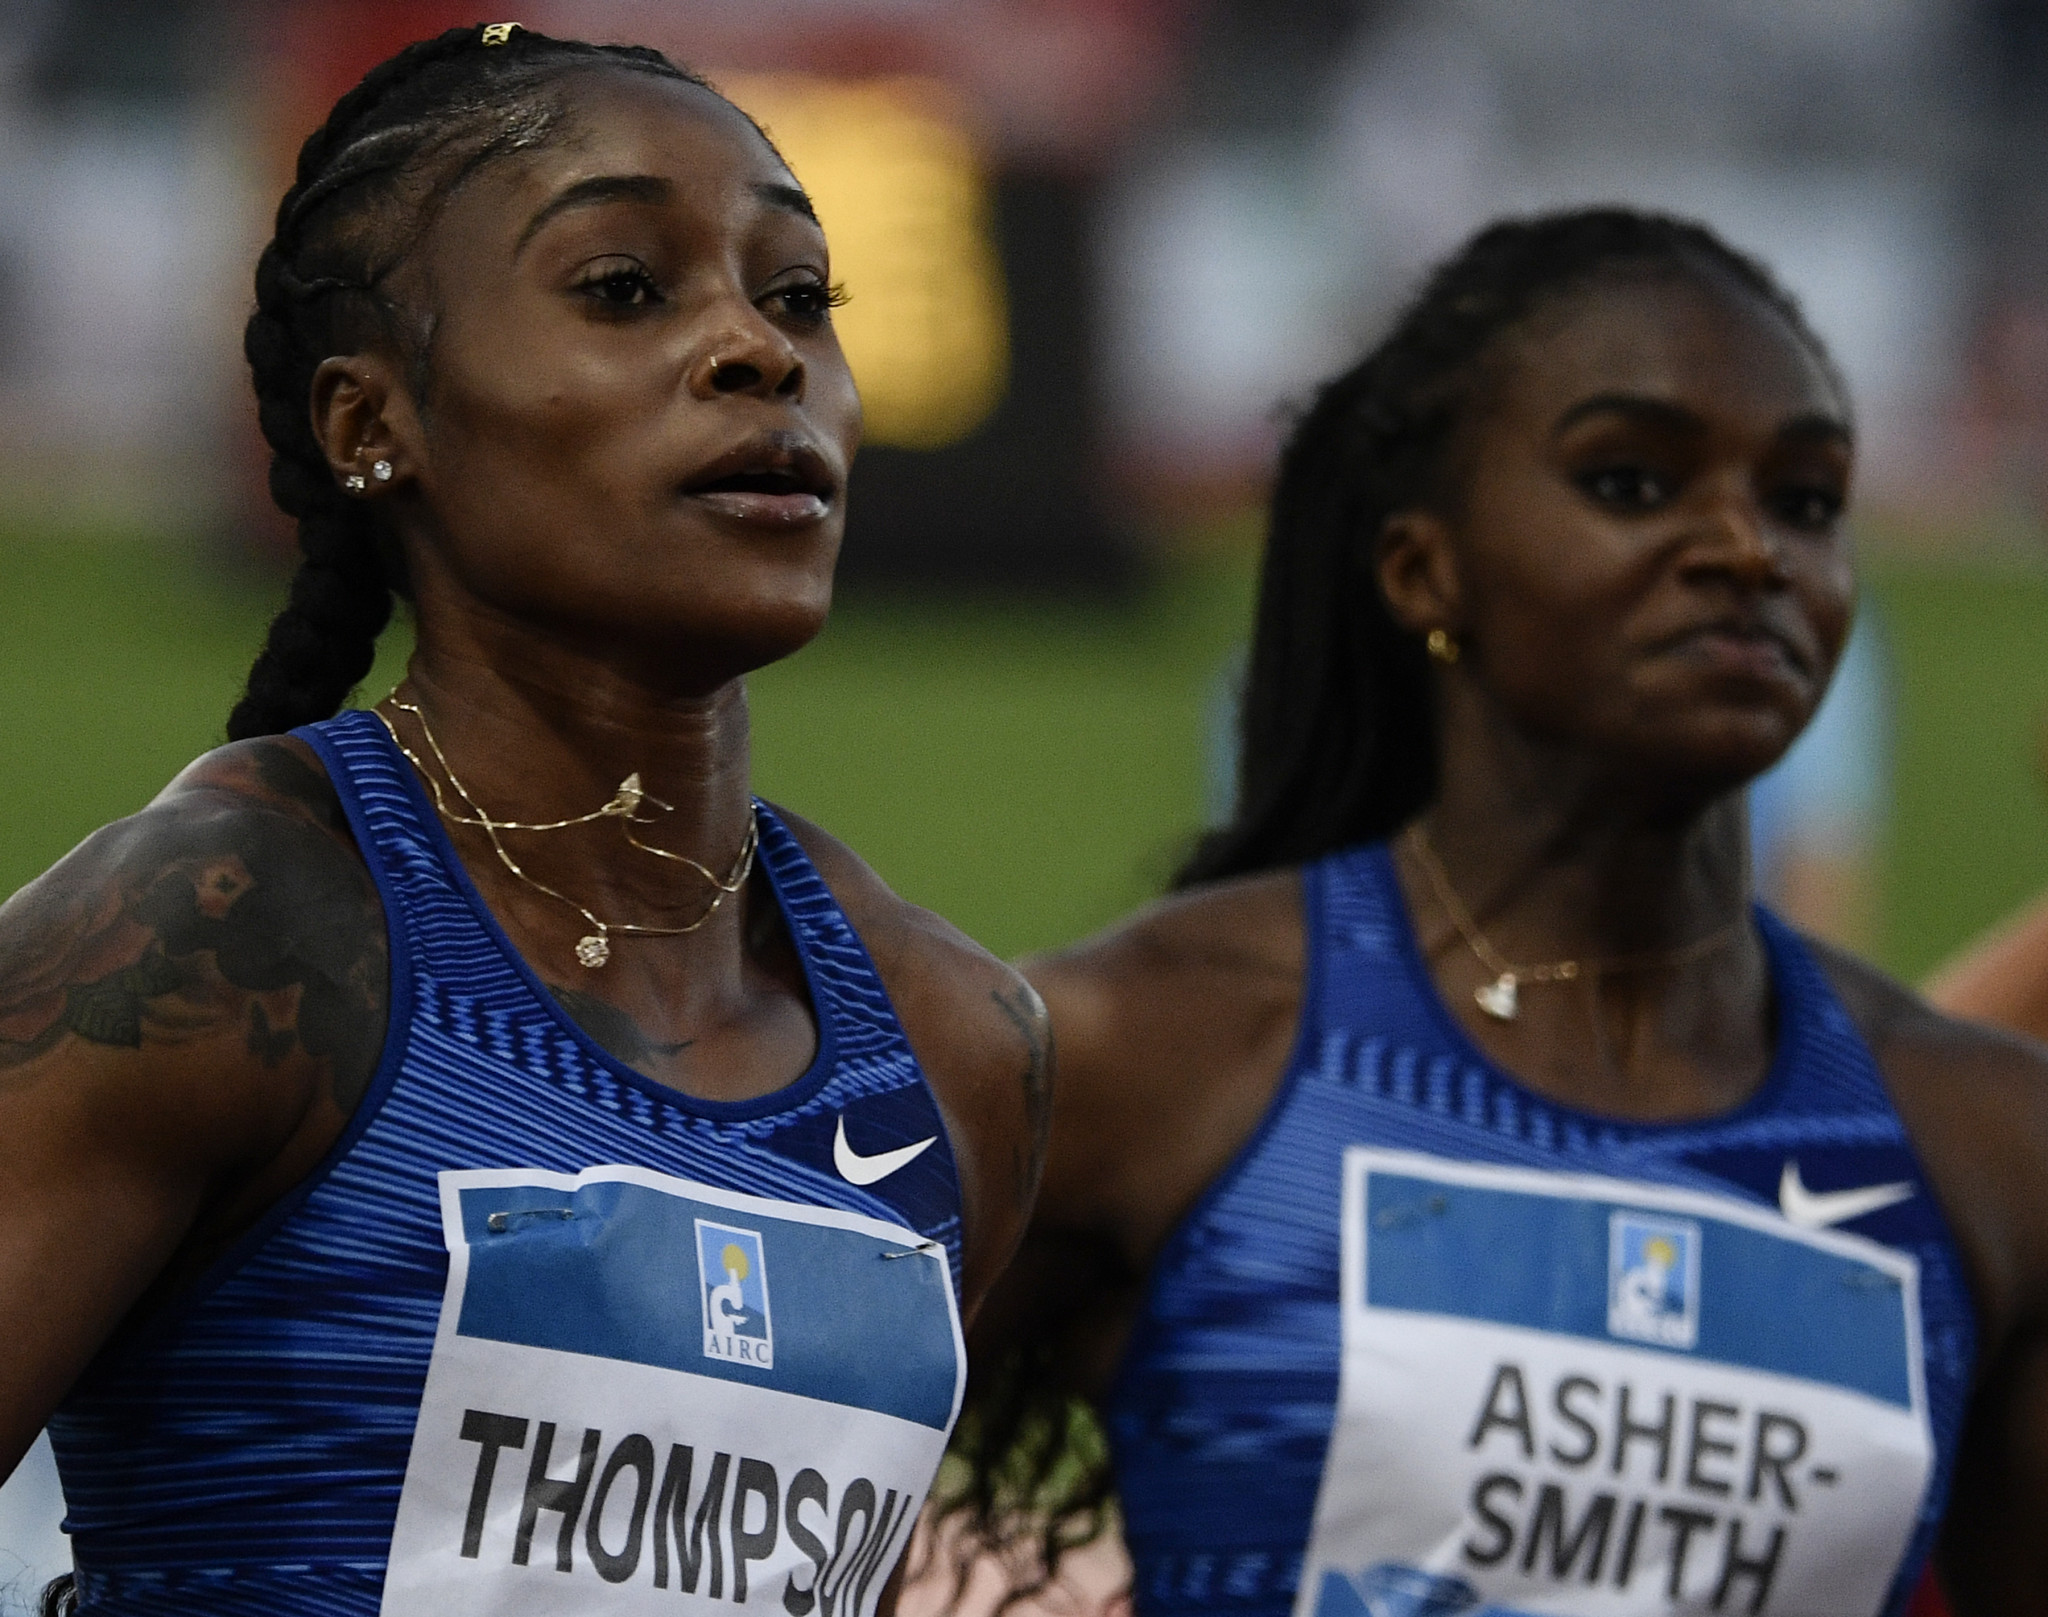 Elaine Thompson, Jamaica's Olympic 100 and 200m champion, and Britain's Dina Asher-Smith, European 100 and 200m champion, could provide some special competition at the IAAF World Championships that start in Doha in 100 days' time ©Getty Images